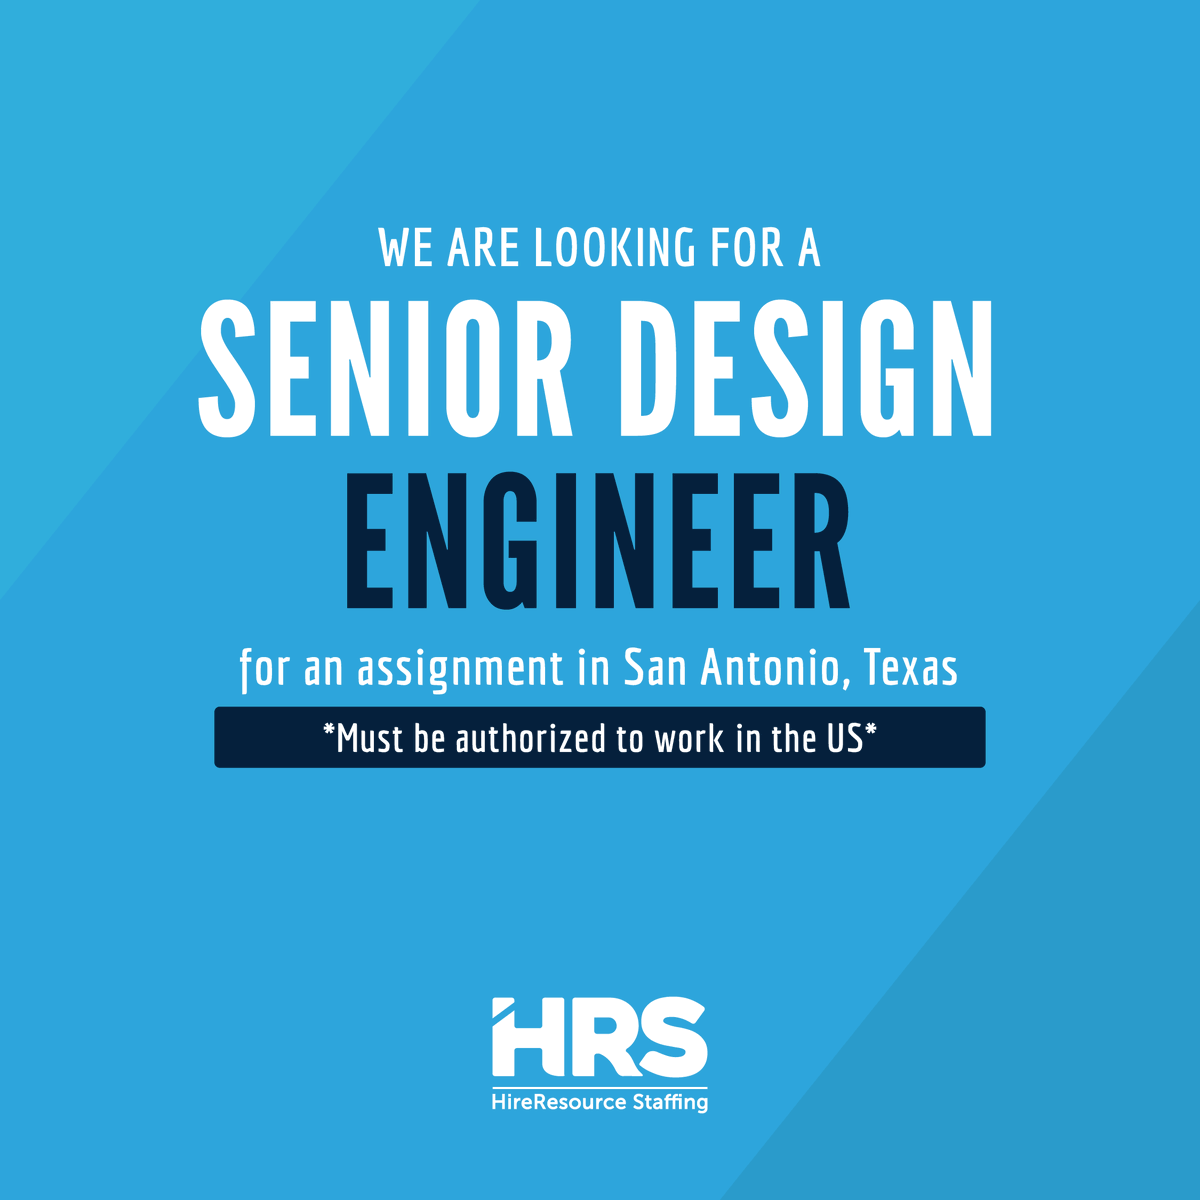 We are hiring a Senior Design Engineer for an assignment in San Antonio, Texas, for more information please visit the following link:

lnkd.in/eGqadFZN

#Senior #DesignEngineer #SanAntonio #Tx #Job #Jobs #HiringNow #JobAlert #Hiring #Vacancy #JobSearch #NewJob #NowHiring